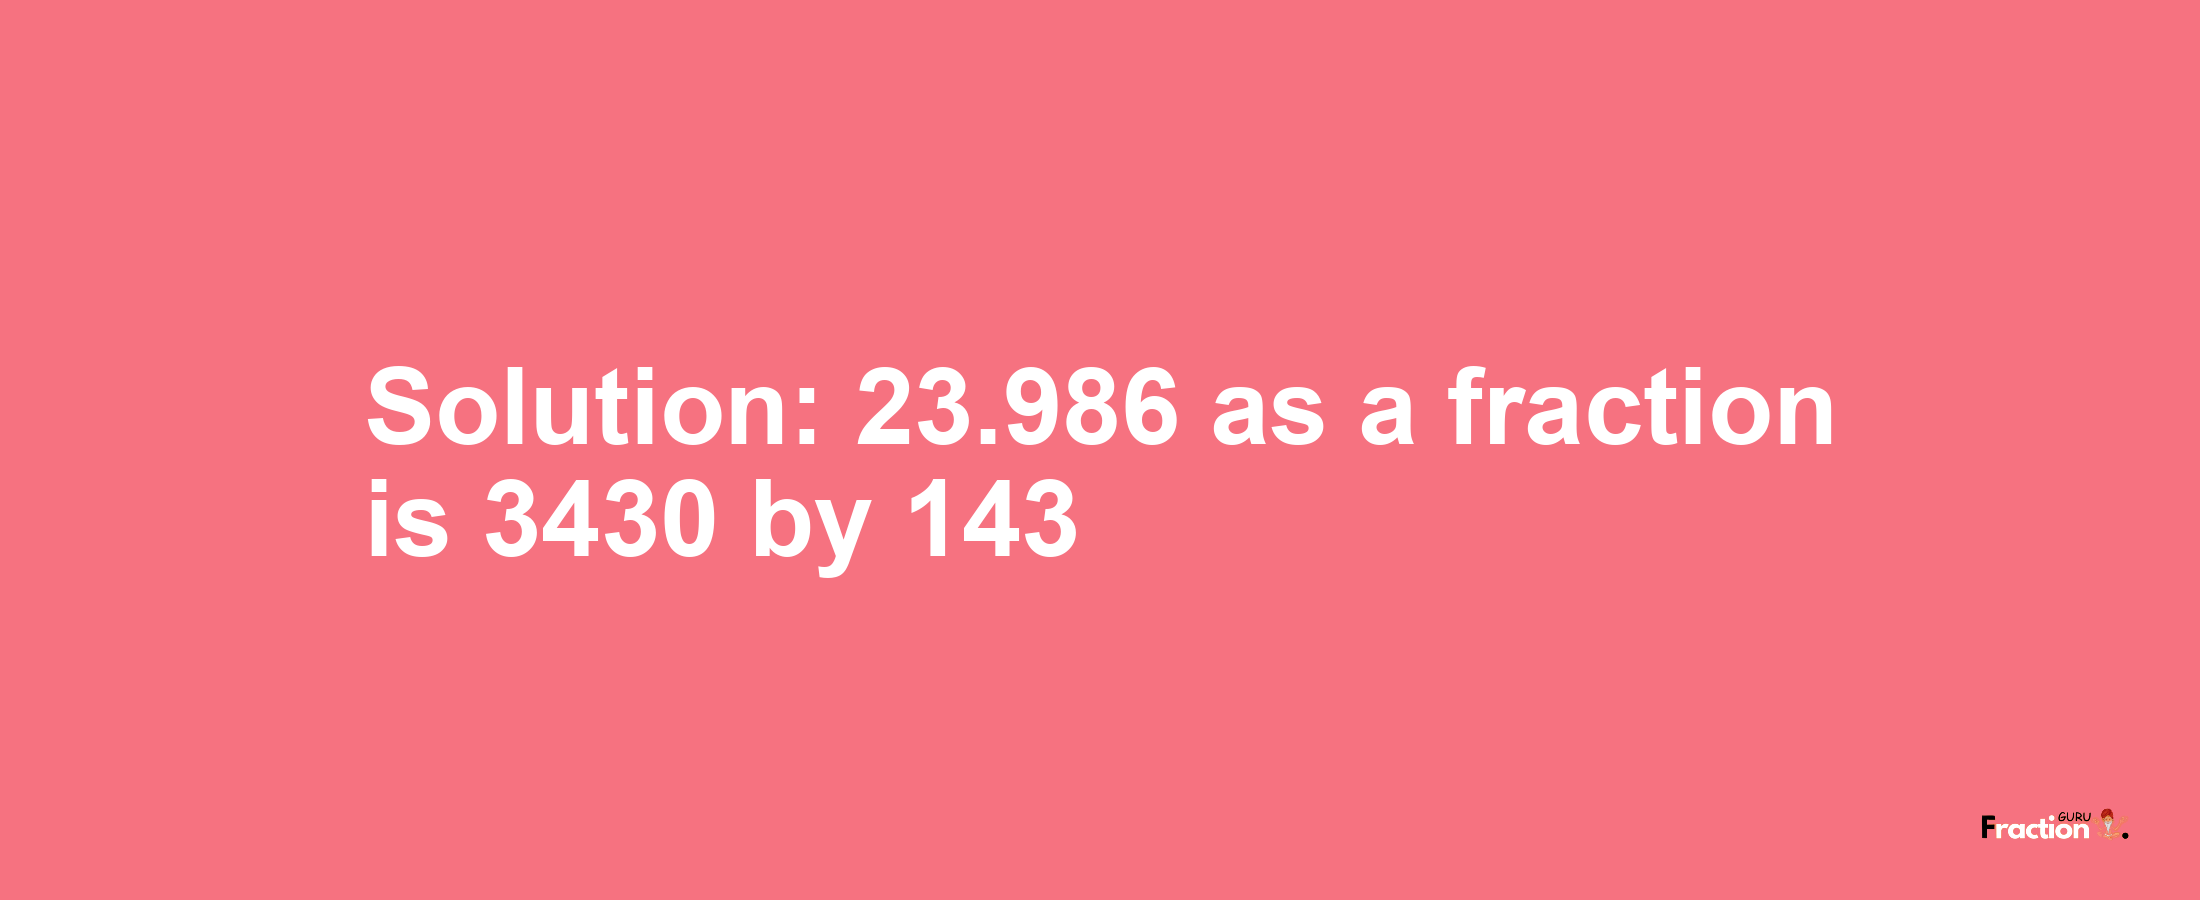 Solution:23.986 as a fraction is 3430/143